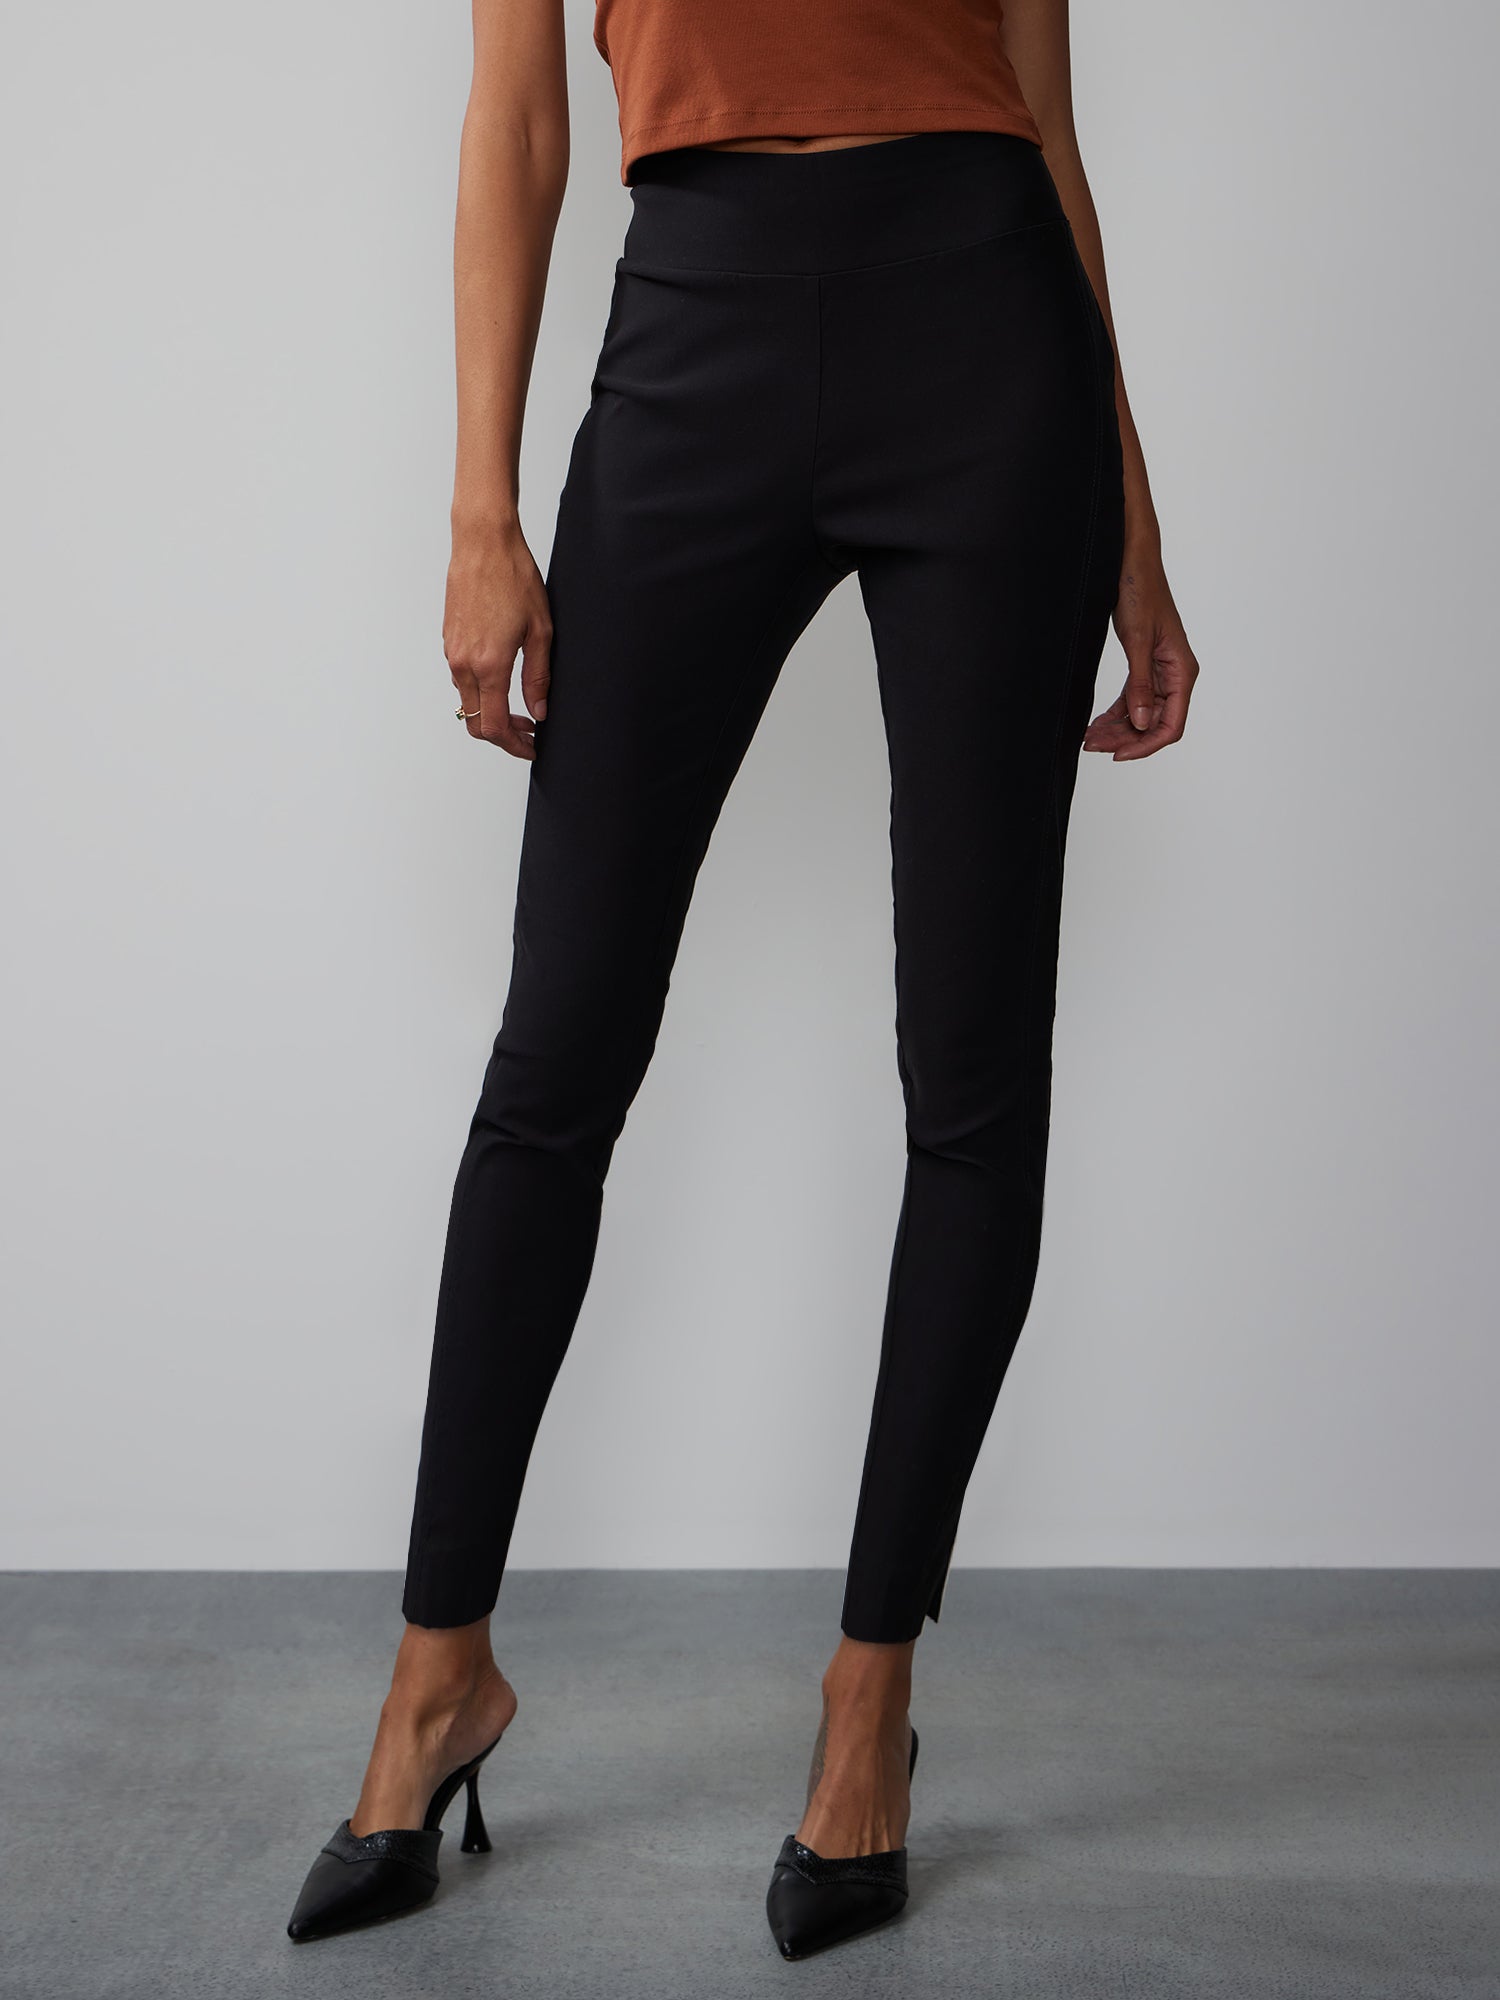 Ankle Length Stretch Pant